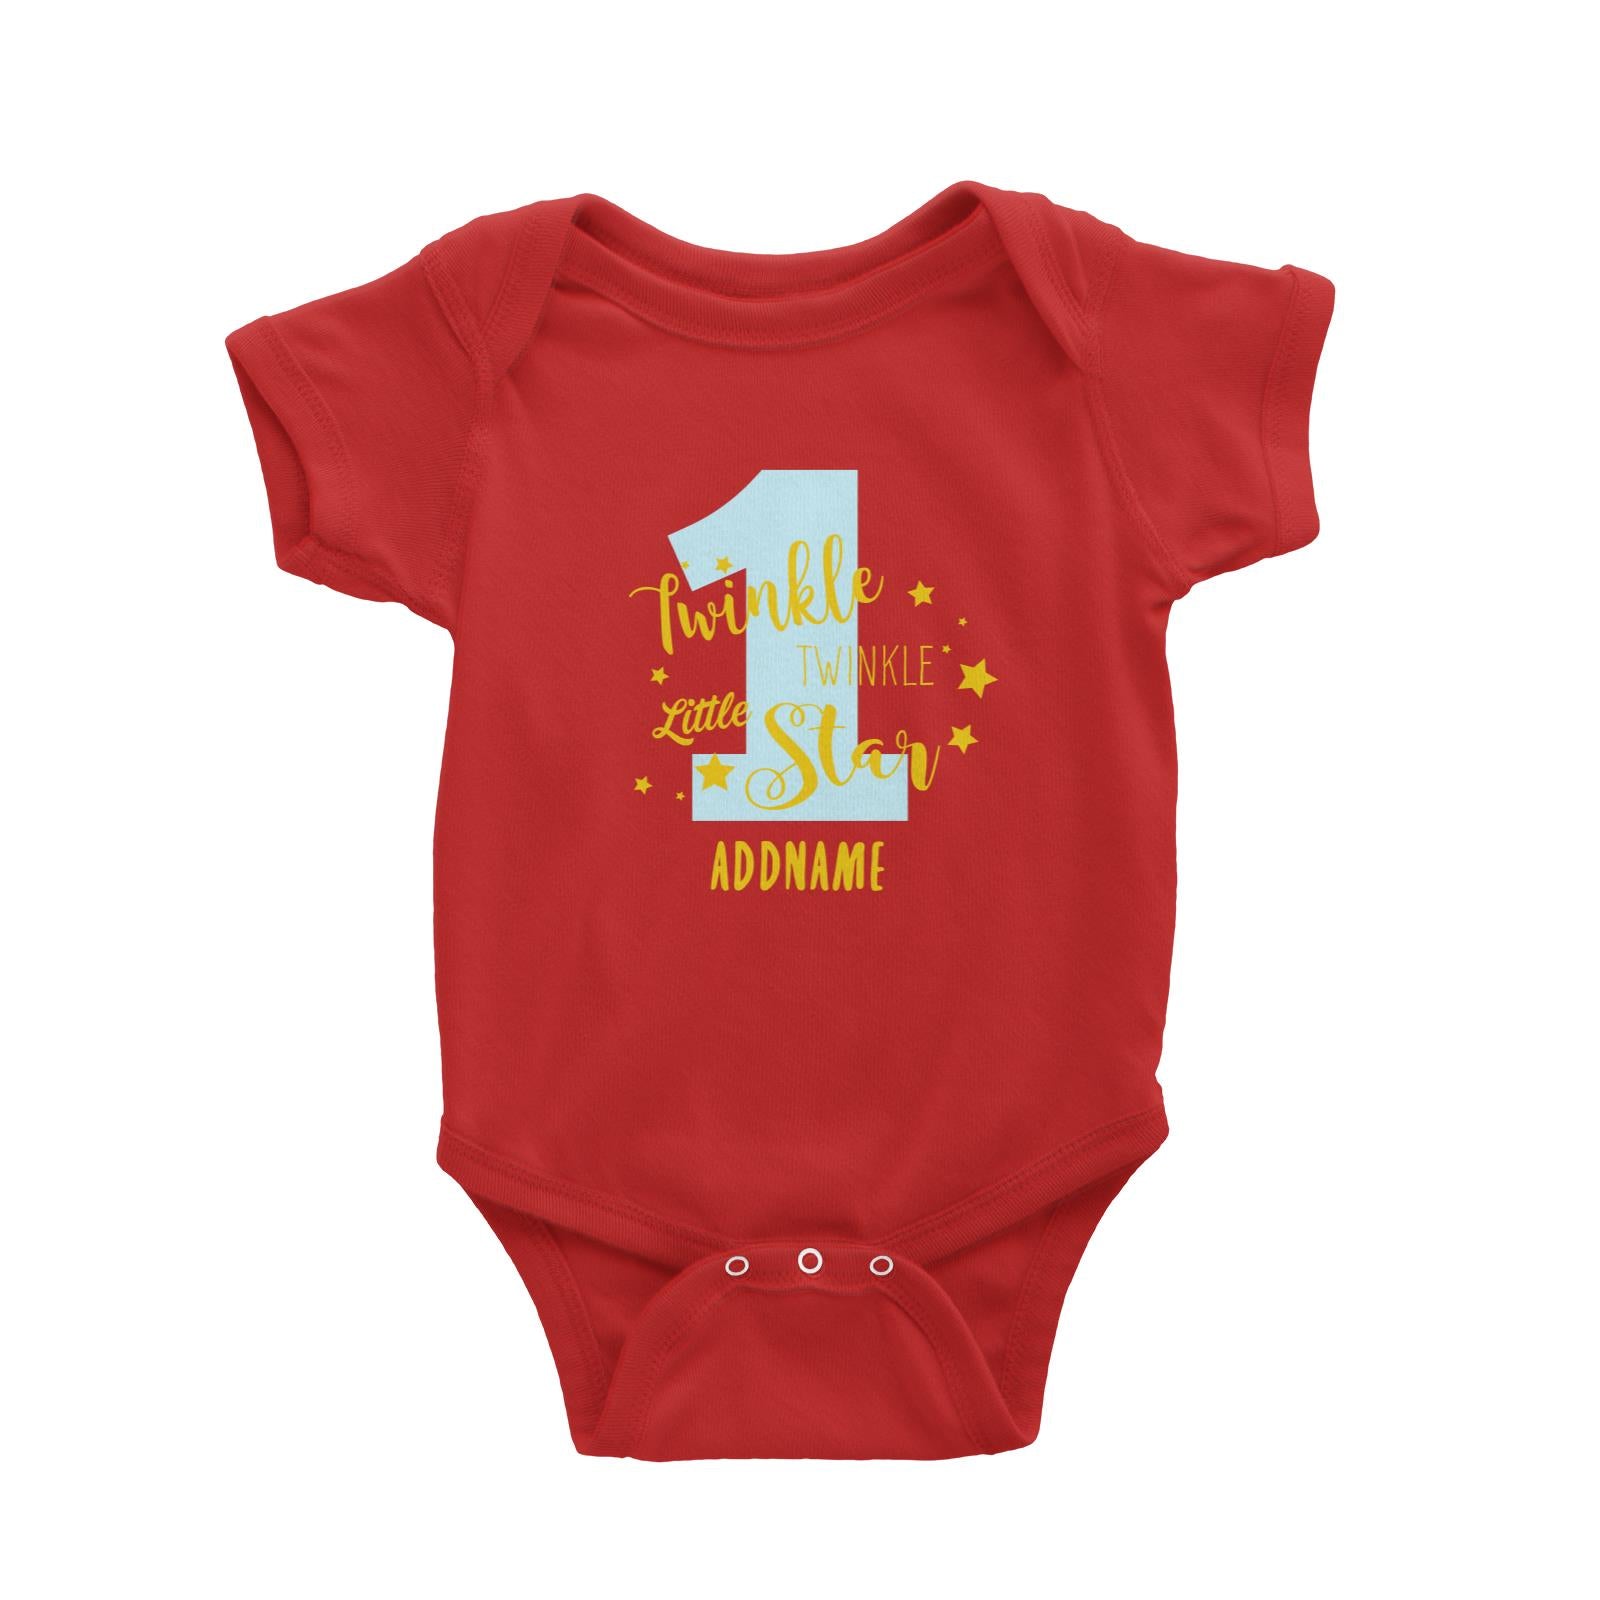 Twinkle Little Star with Blue One Addname Baby Romper Personalizable Designs Basic Newborn